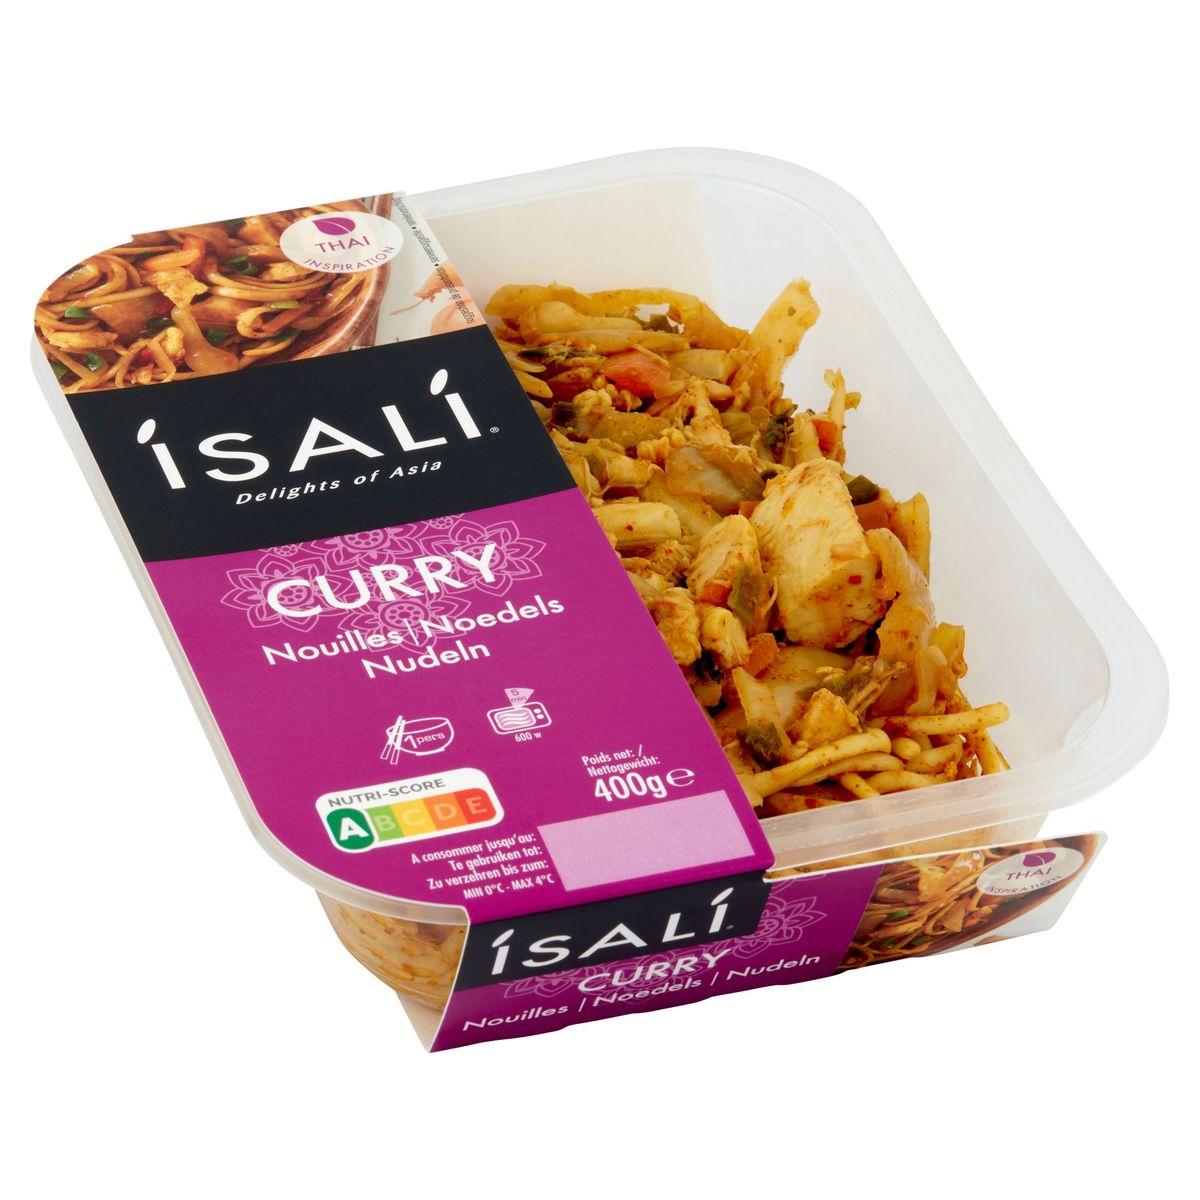 Isali Curry Noedels 400 g